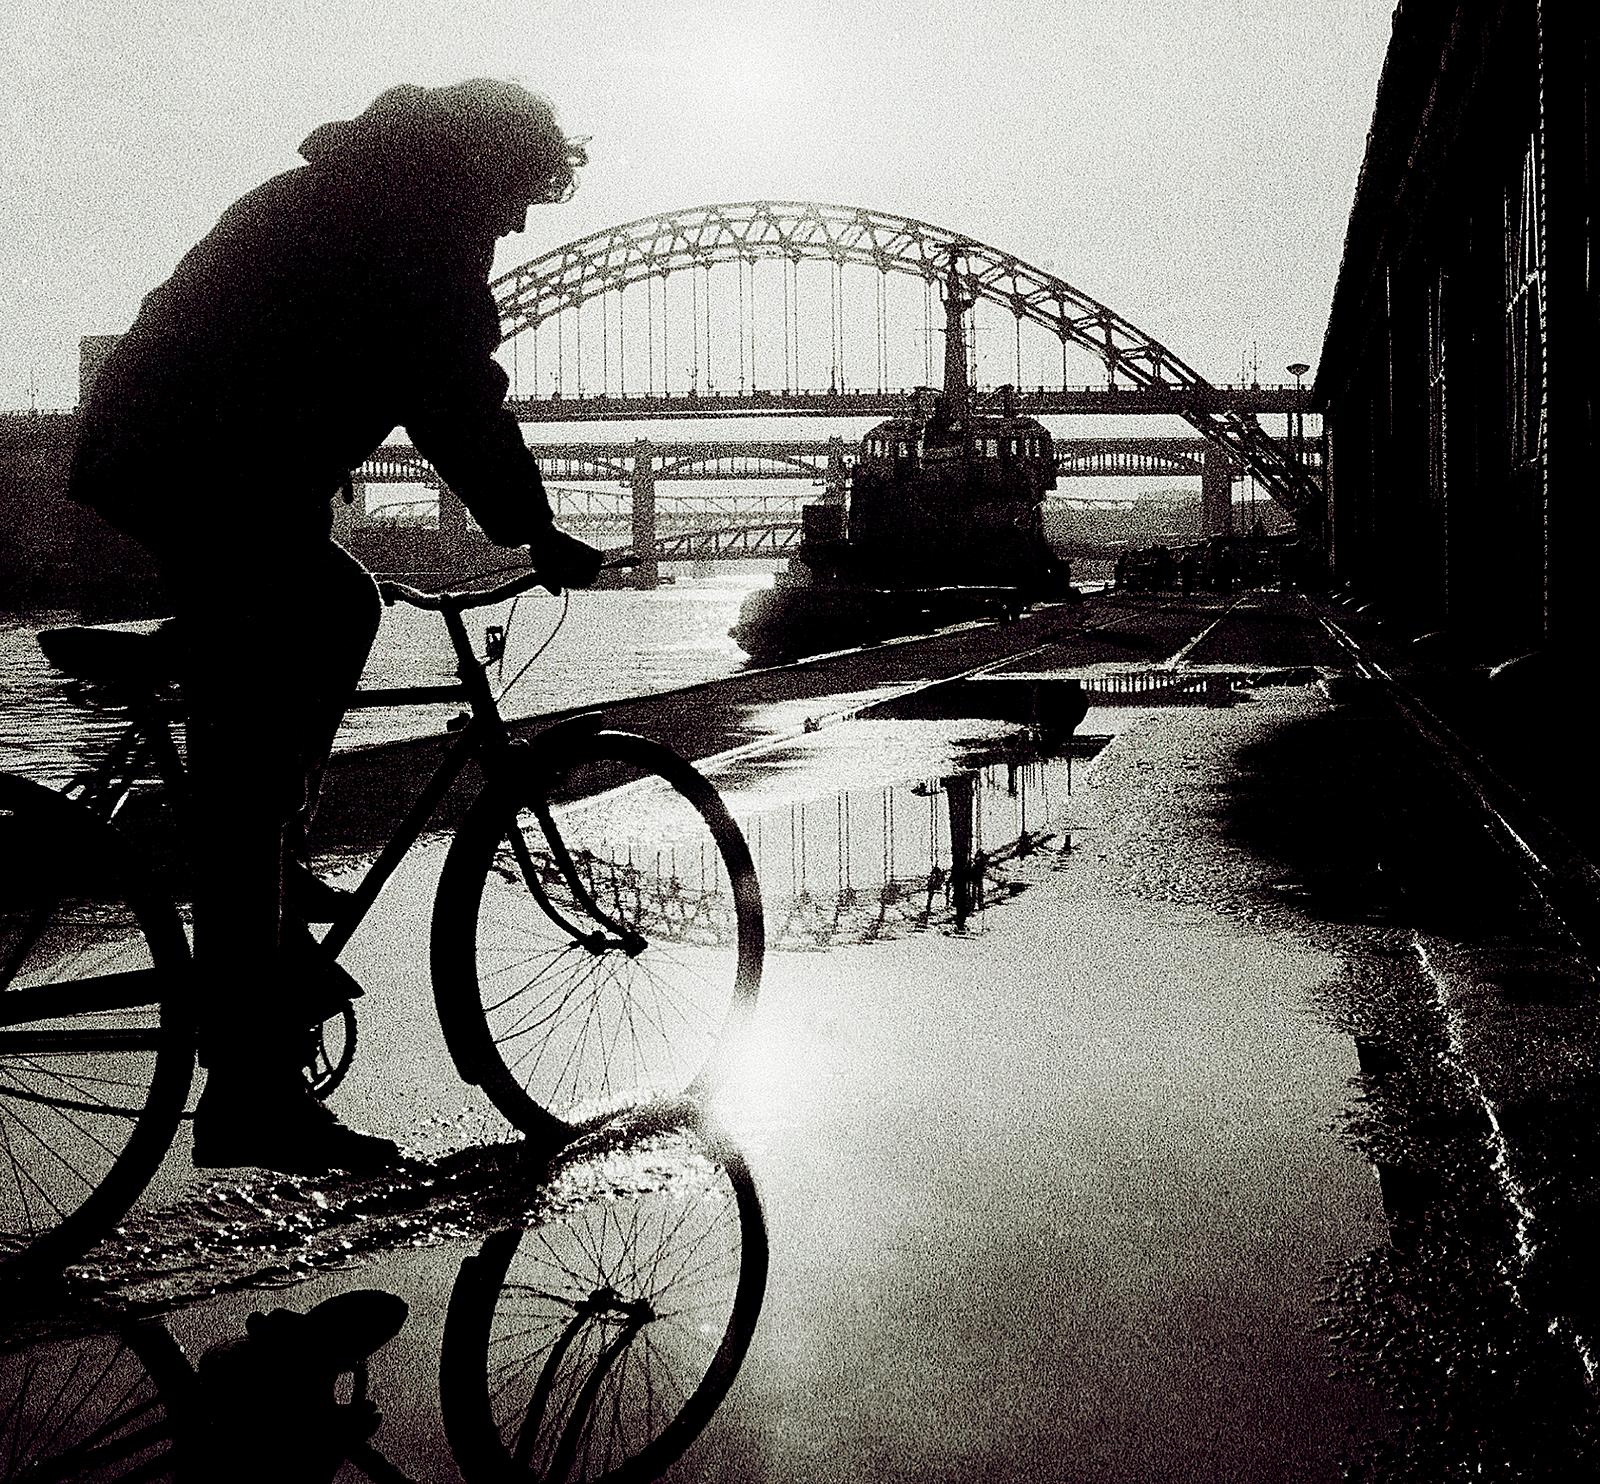 Newcastle - Signed limited edition fine art print, black and white photo, City - Contemporary Photograph by Ian Sanderson